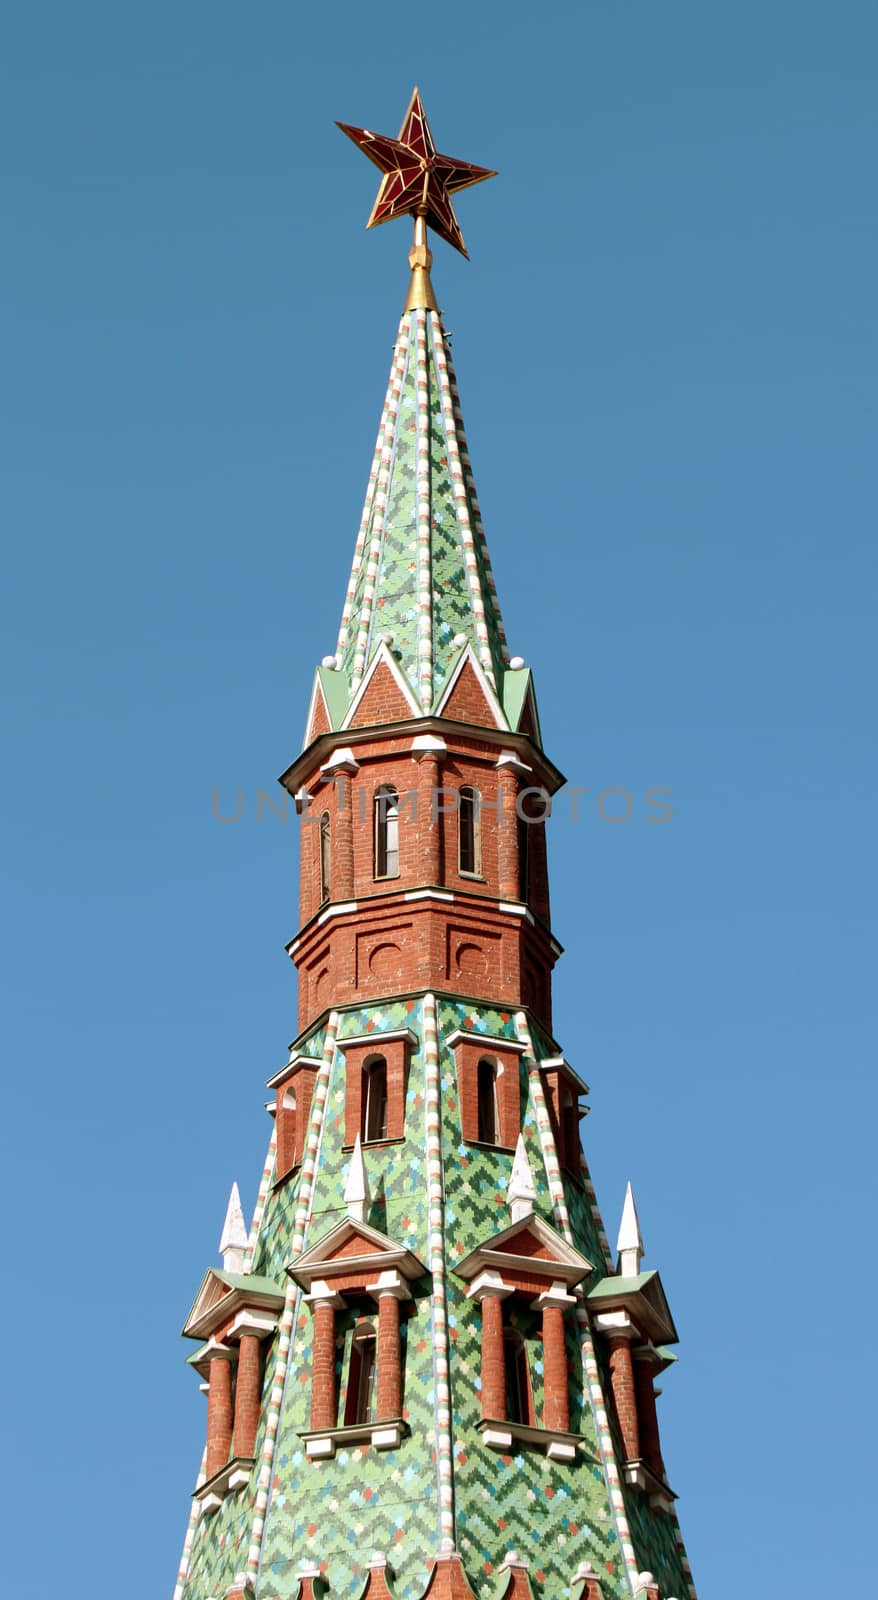 The top of the tower with the star of the Moscow Kremlin